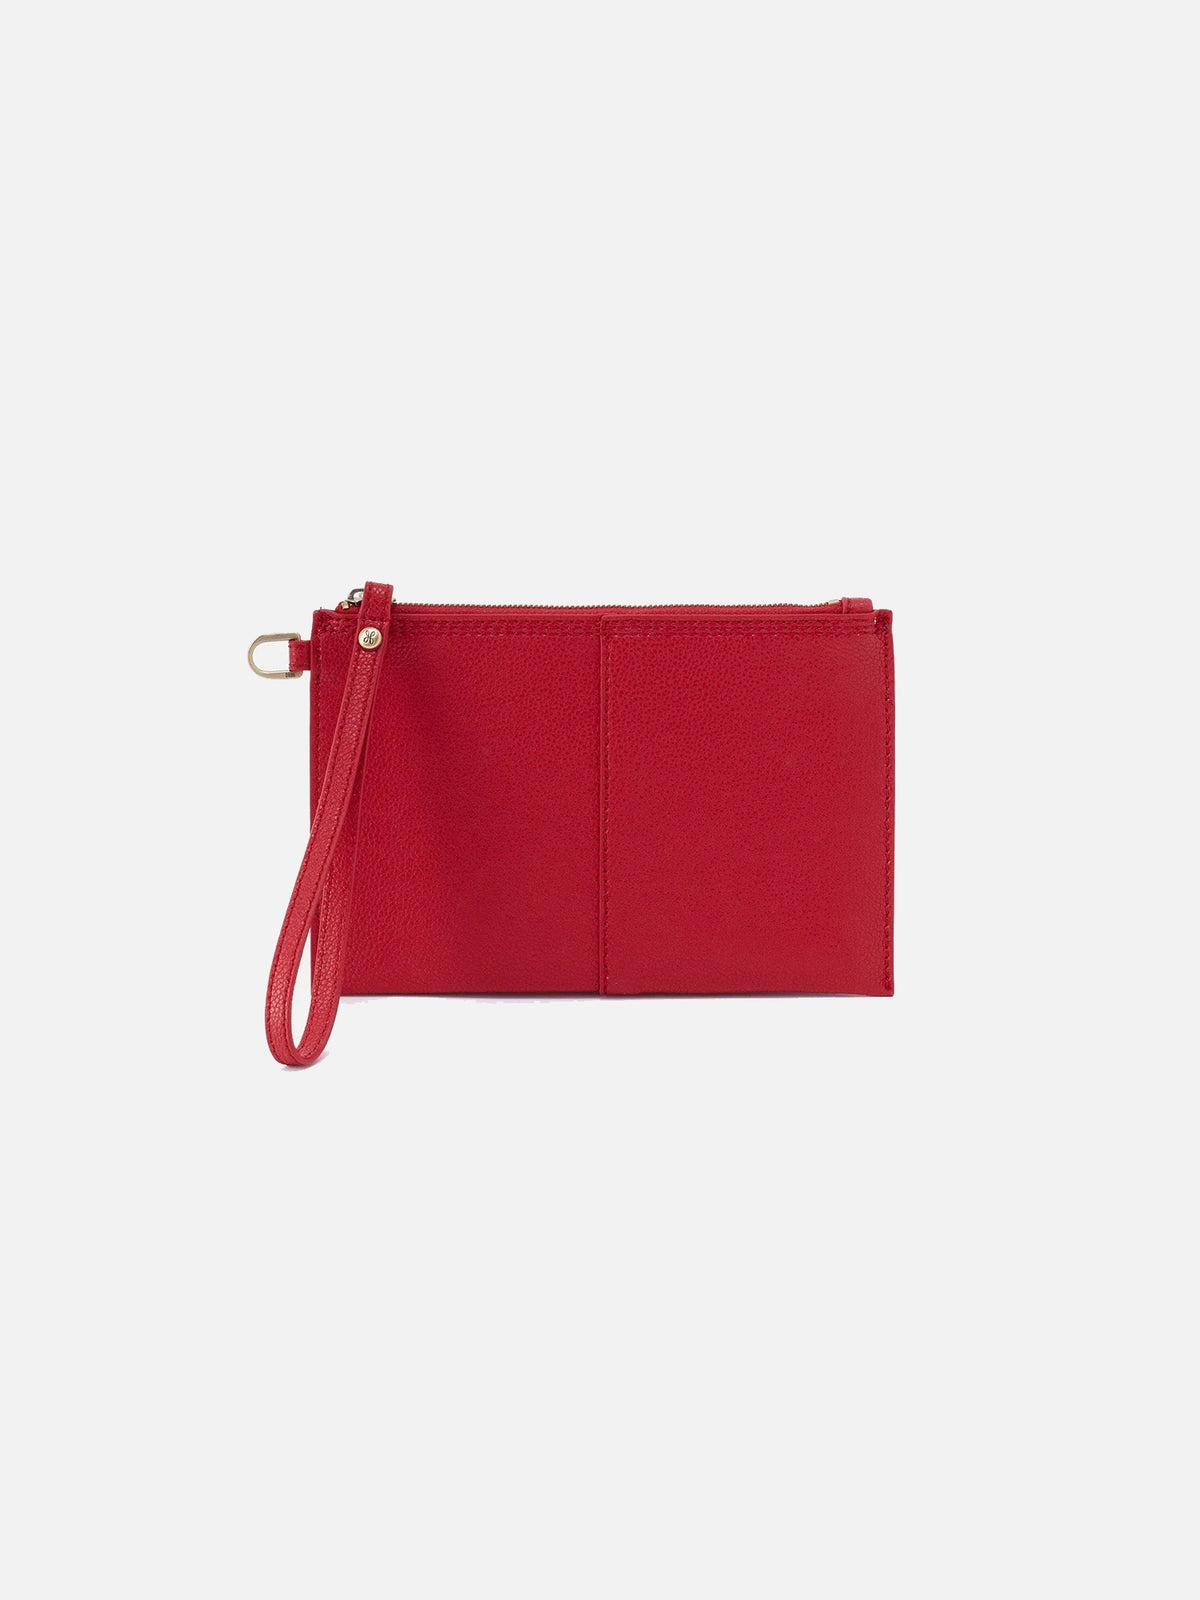 hobo vida small pouch in tango red micro pebbled leather